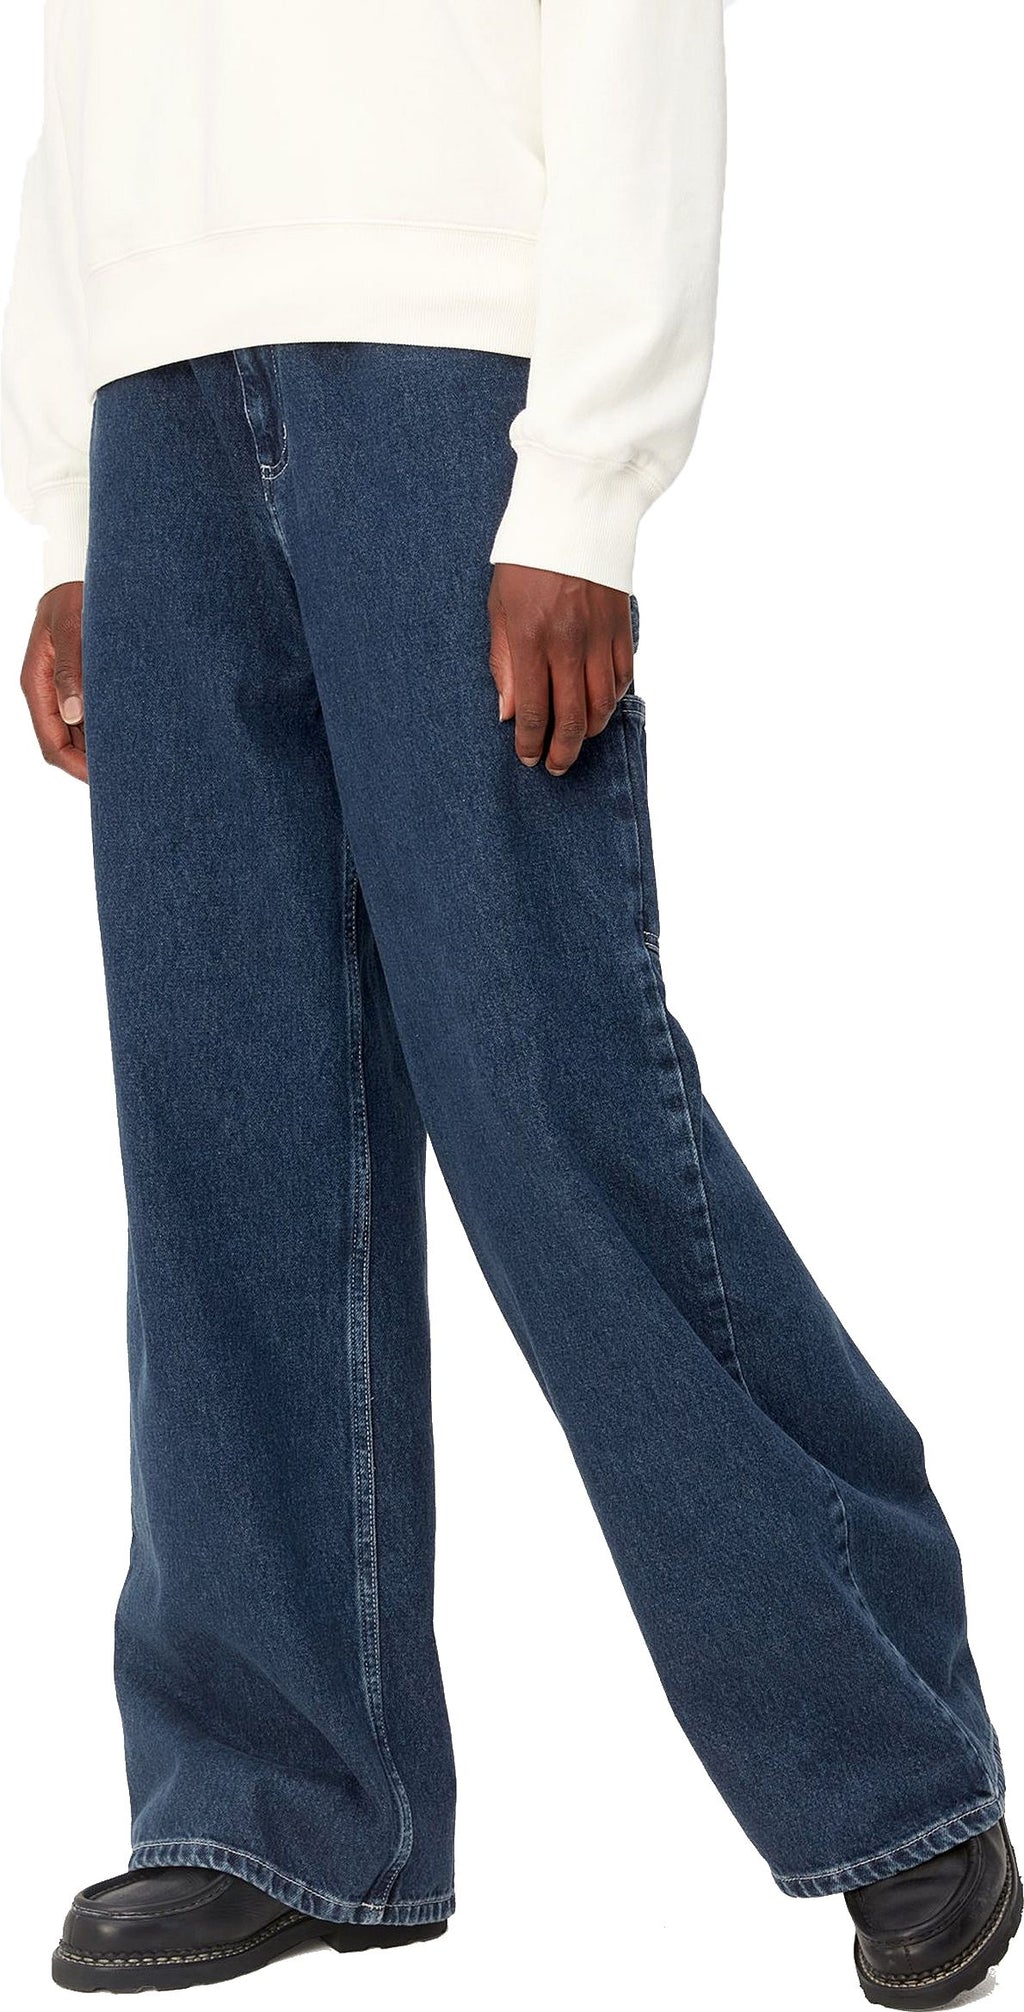  Carhartt Wip Jeans W Jens Pant Blue Stone Washed Donna - 4